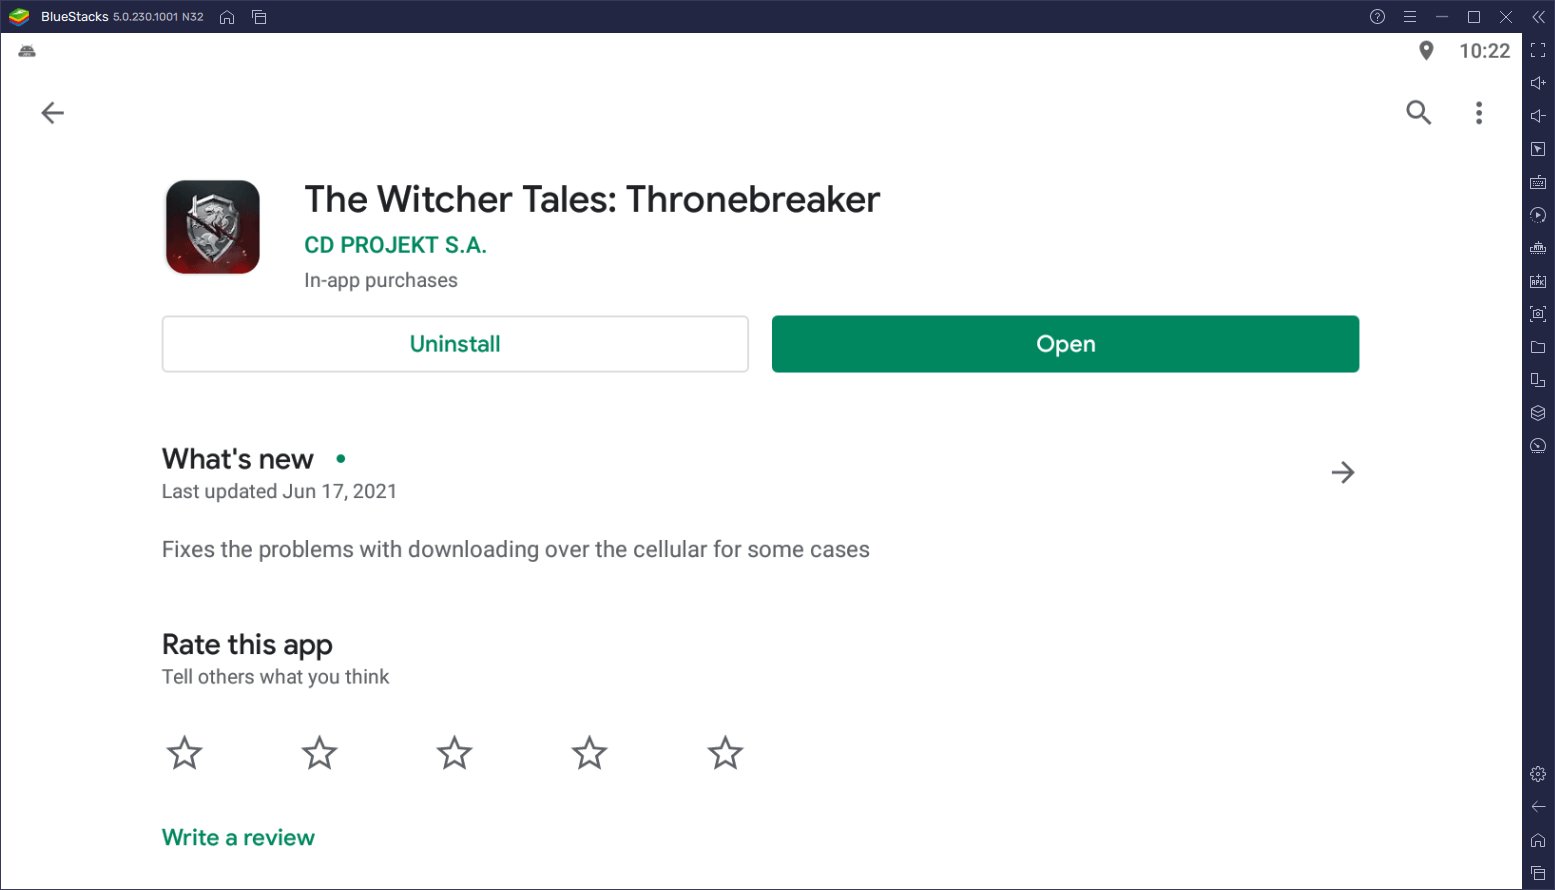 How to Play The Witcher Tales: Thronebreaker on PC for Free